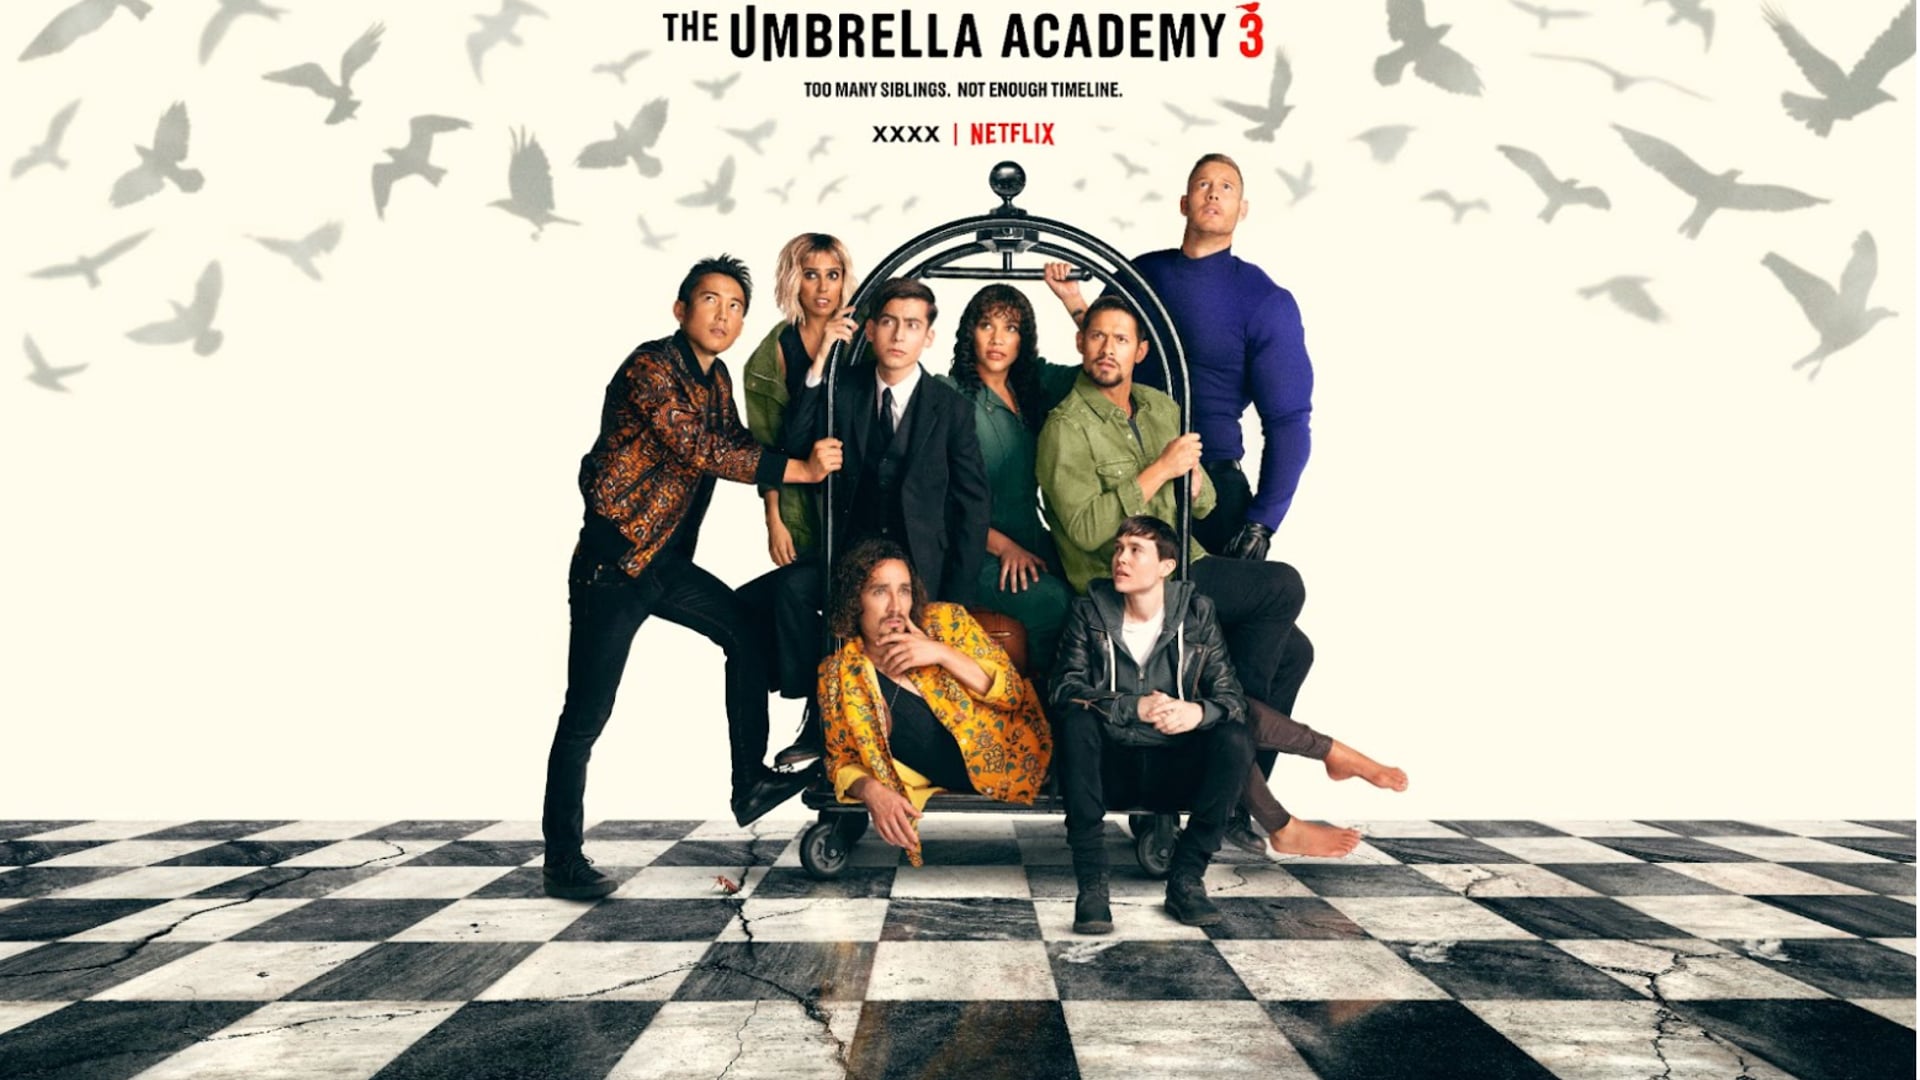 The Umbrella Academy S3 Teaser - Time Traveling Problem